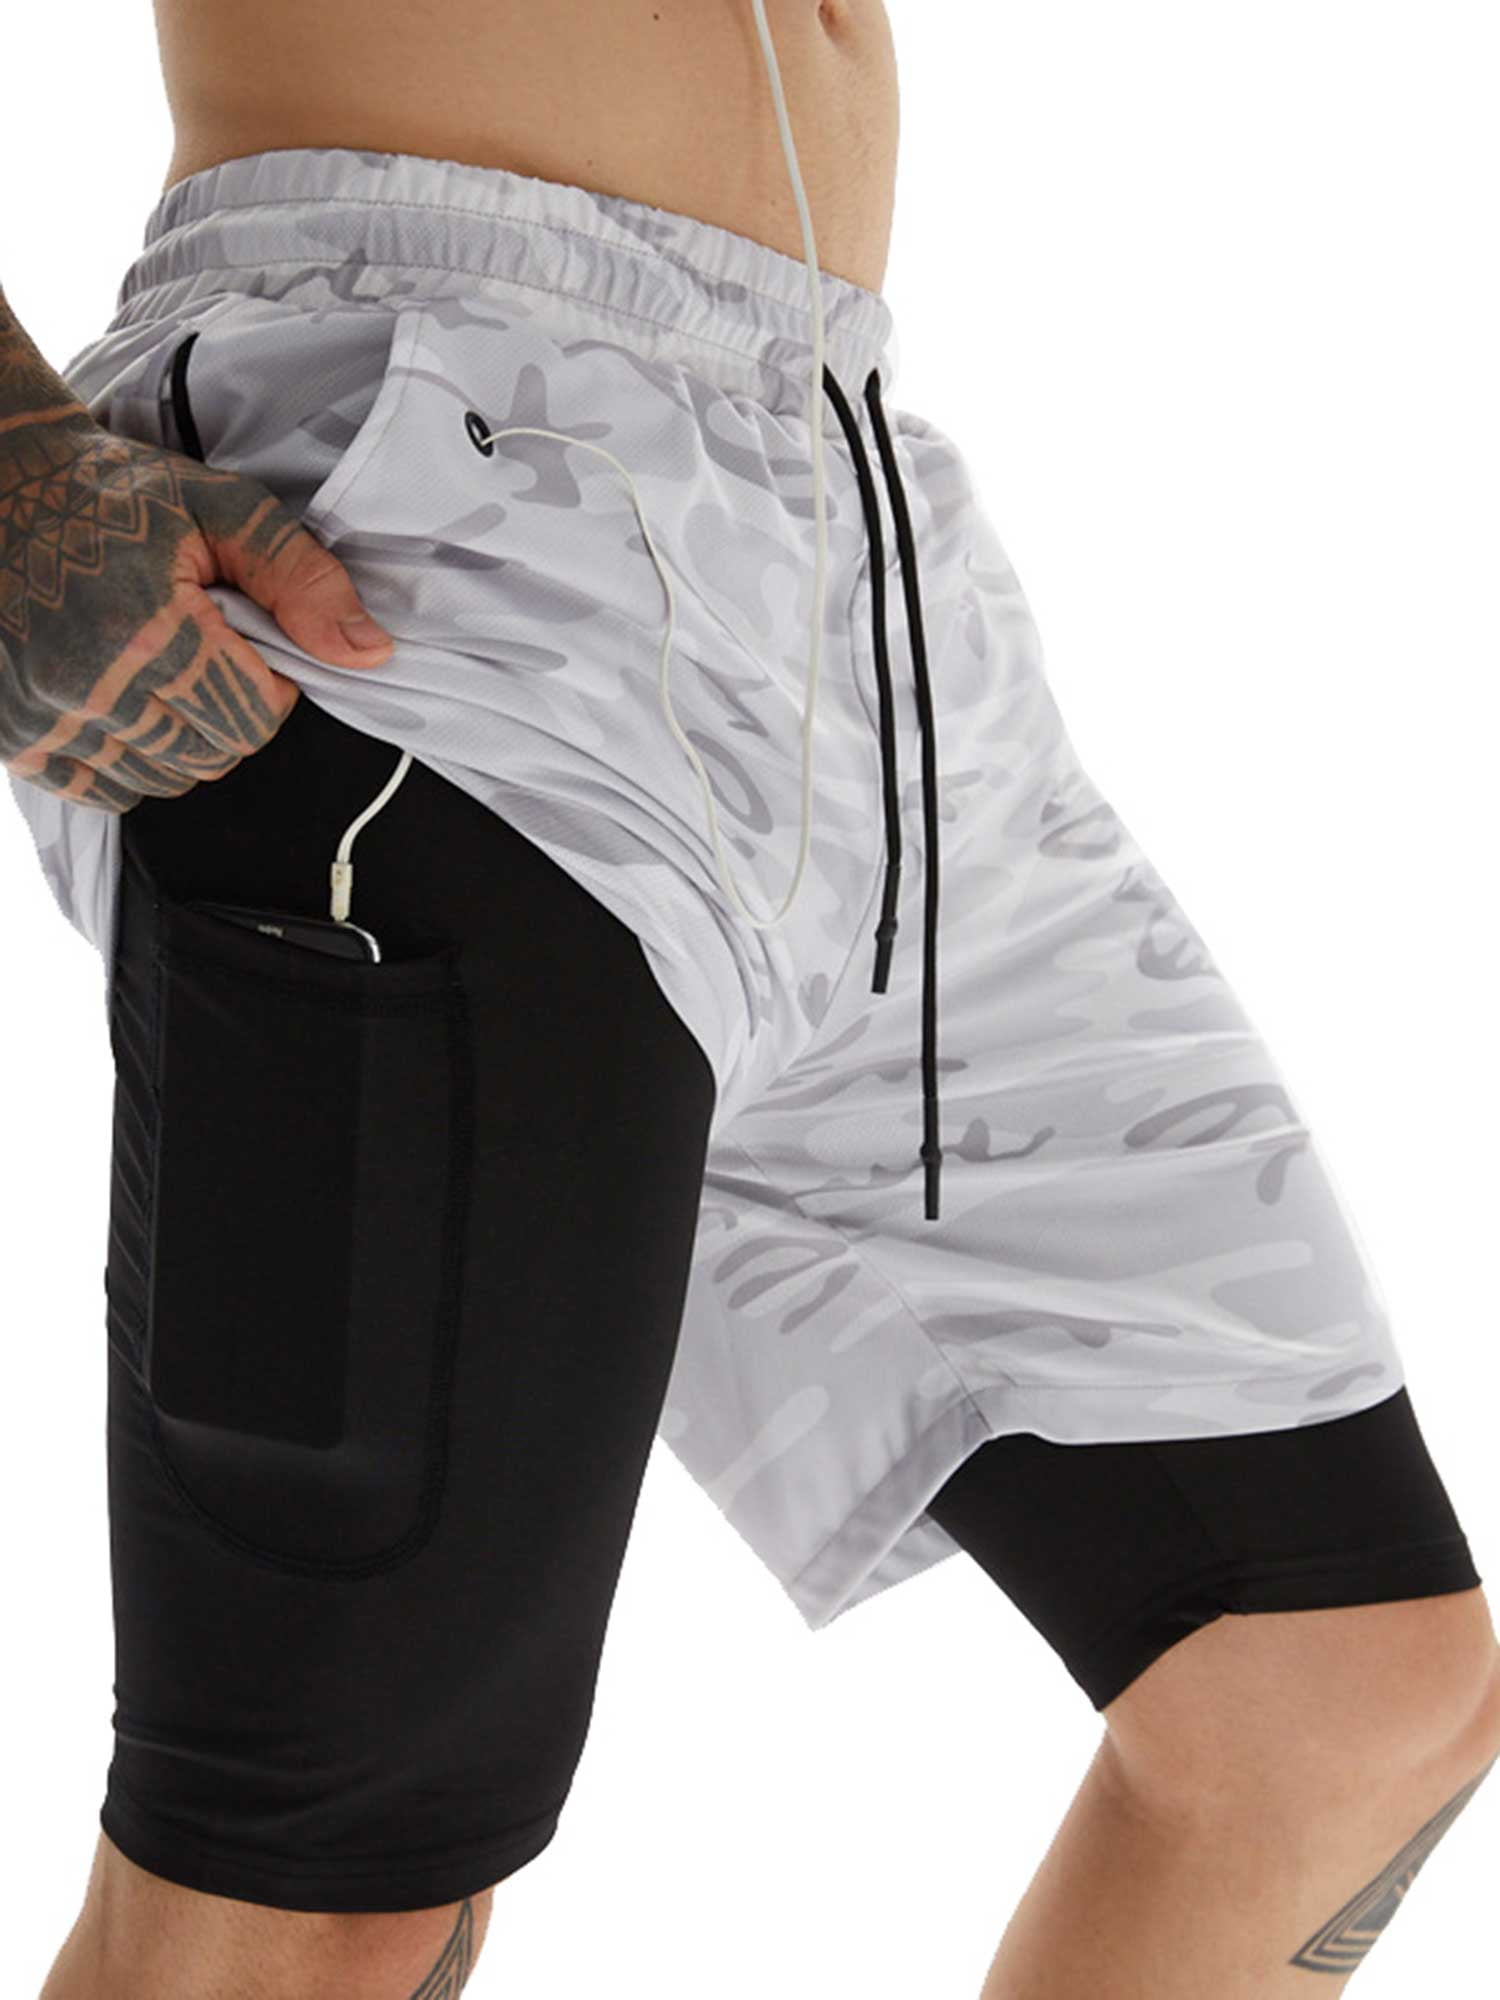 Men's Casual Sport Shorts 2 in 1 Running Shorts with Pocket Quick-drying  Fitness Double Layer Short Pants Workout Jogging Bottoms 